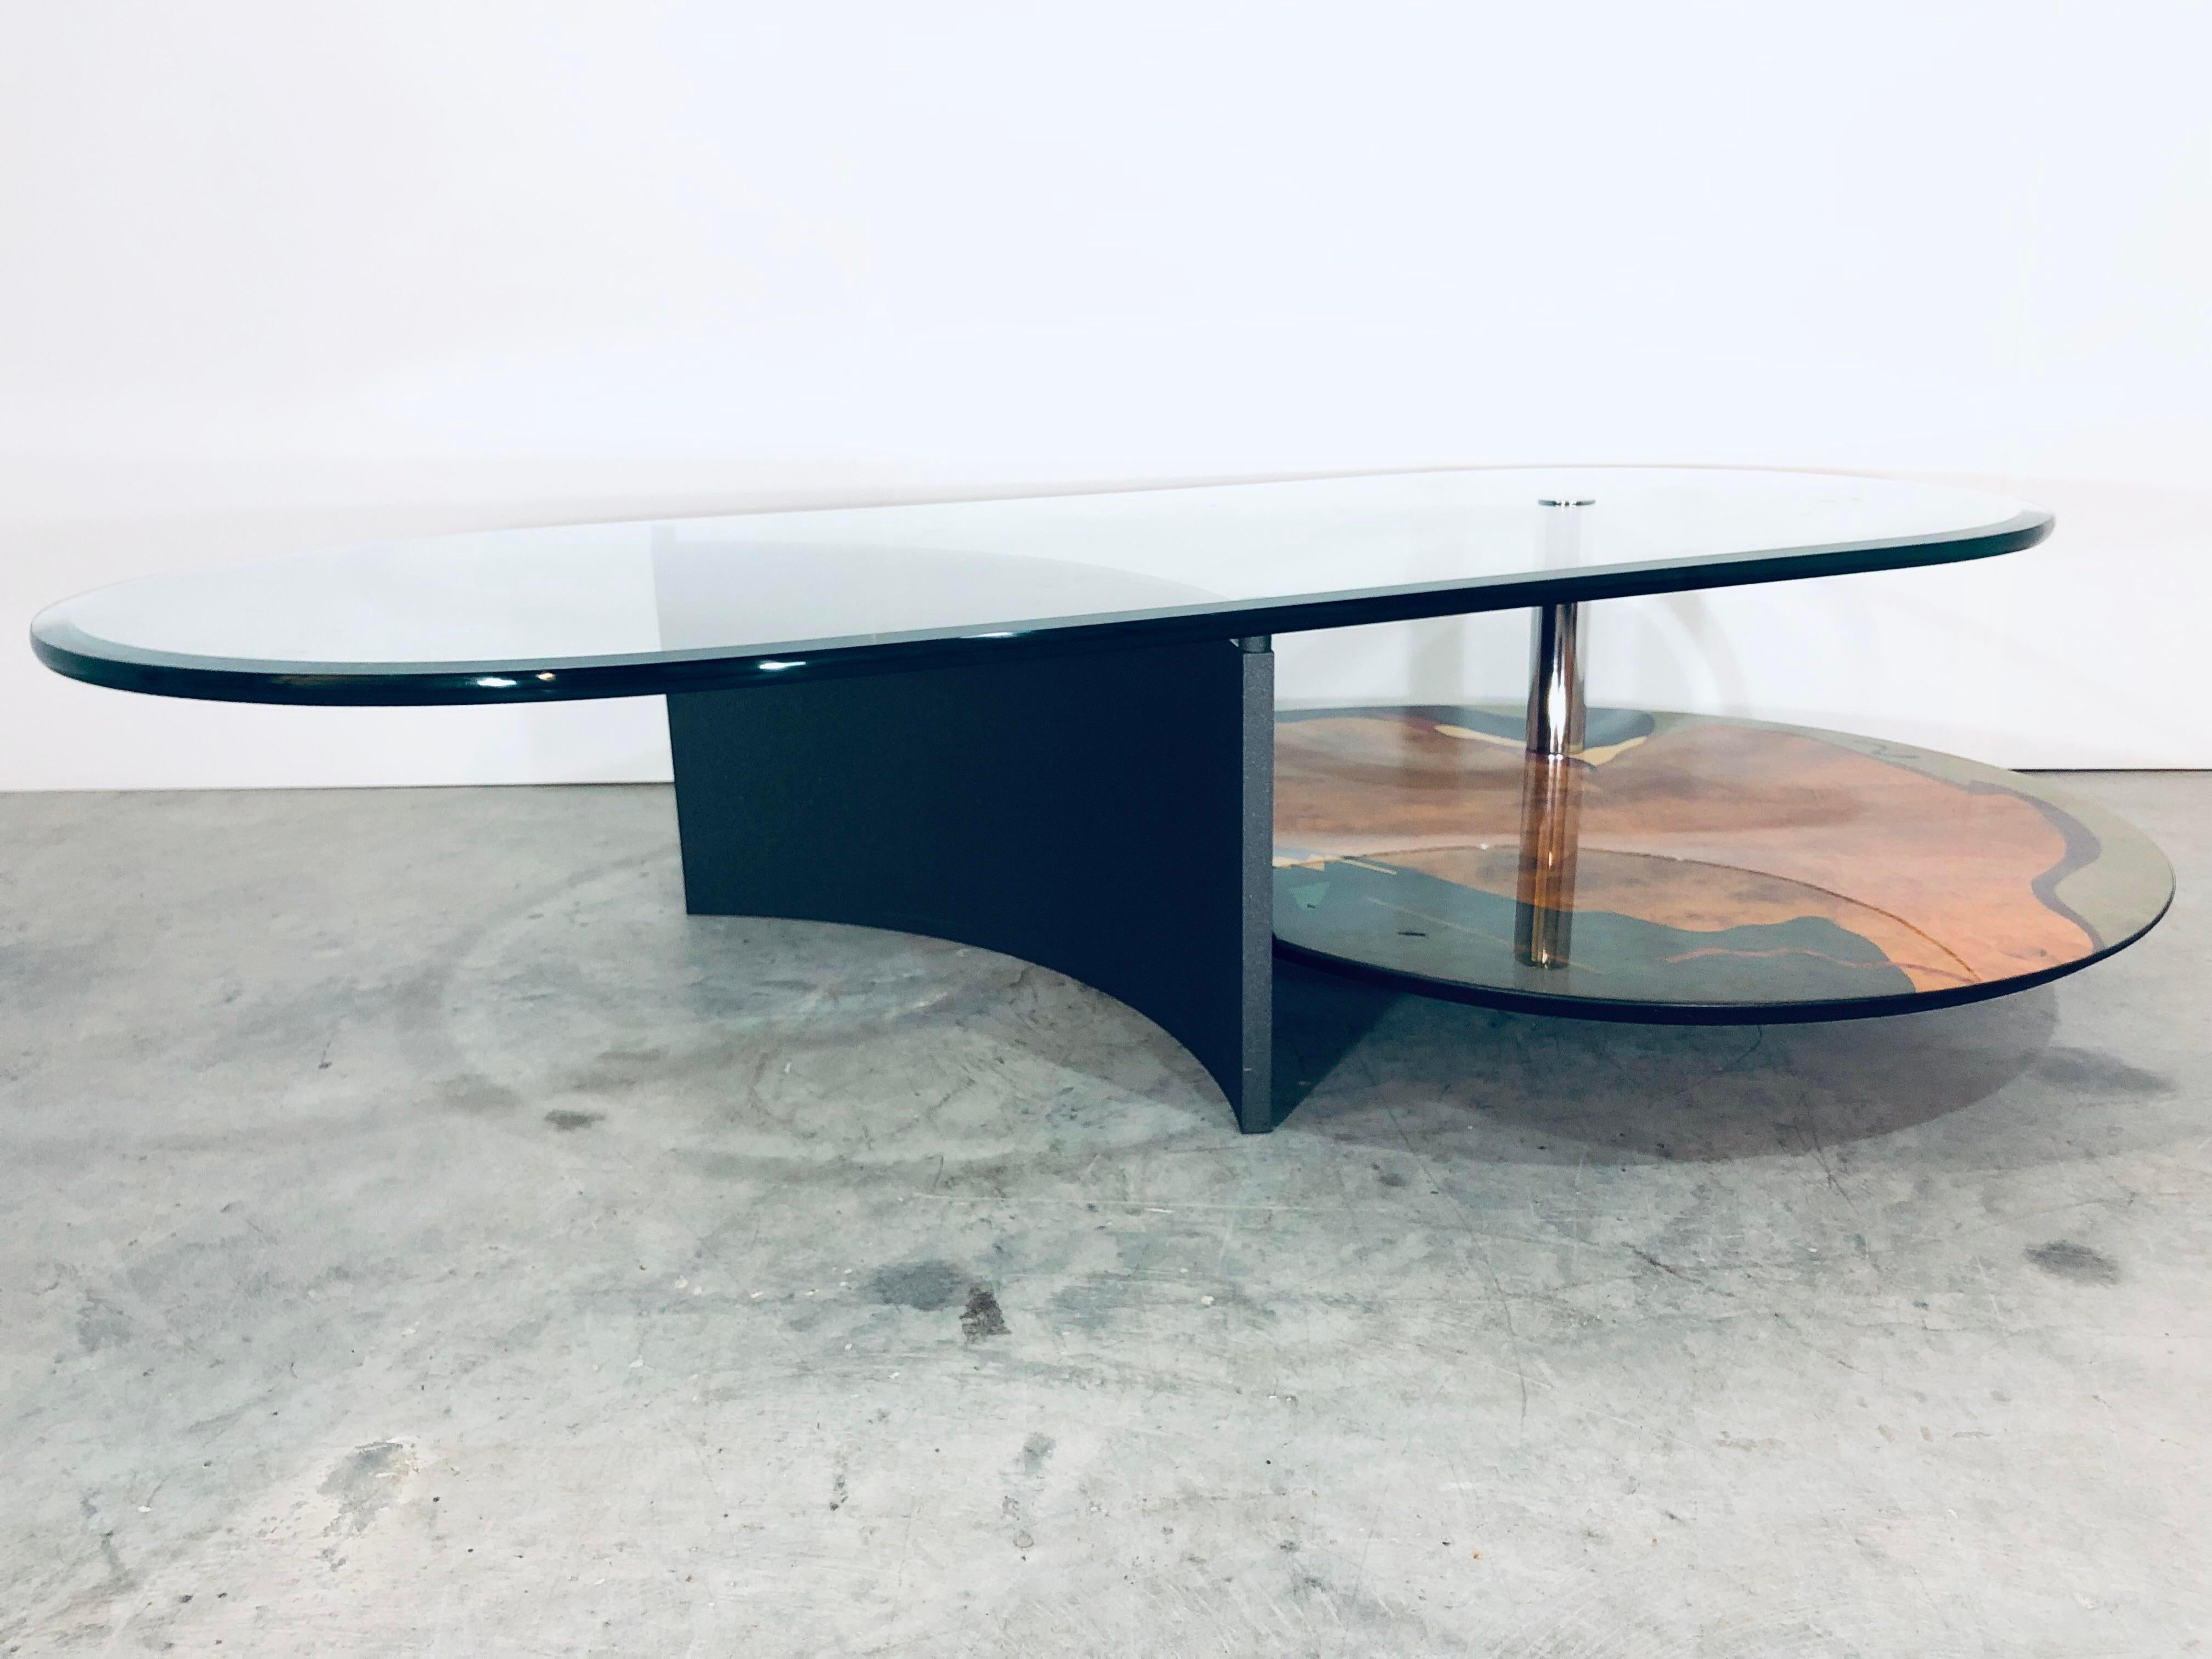 Unique coffee table with geometric burl wood art base and 3/4” cantilevered glass top with 1” bevel designed and produced by Carlo Malnati, Italy. Signed on wood base near chrome tube.

Glass Dirmensions:
W28” D60”